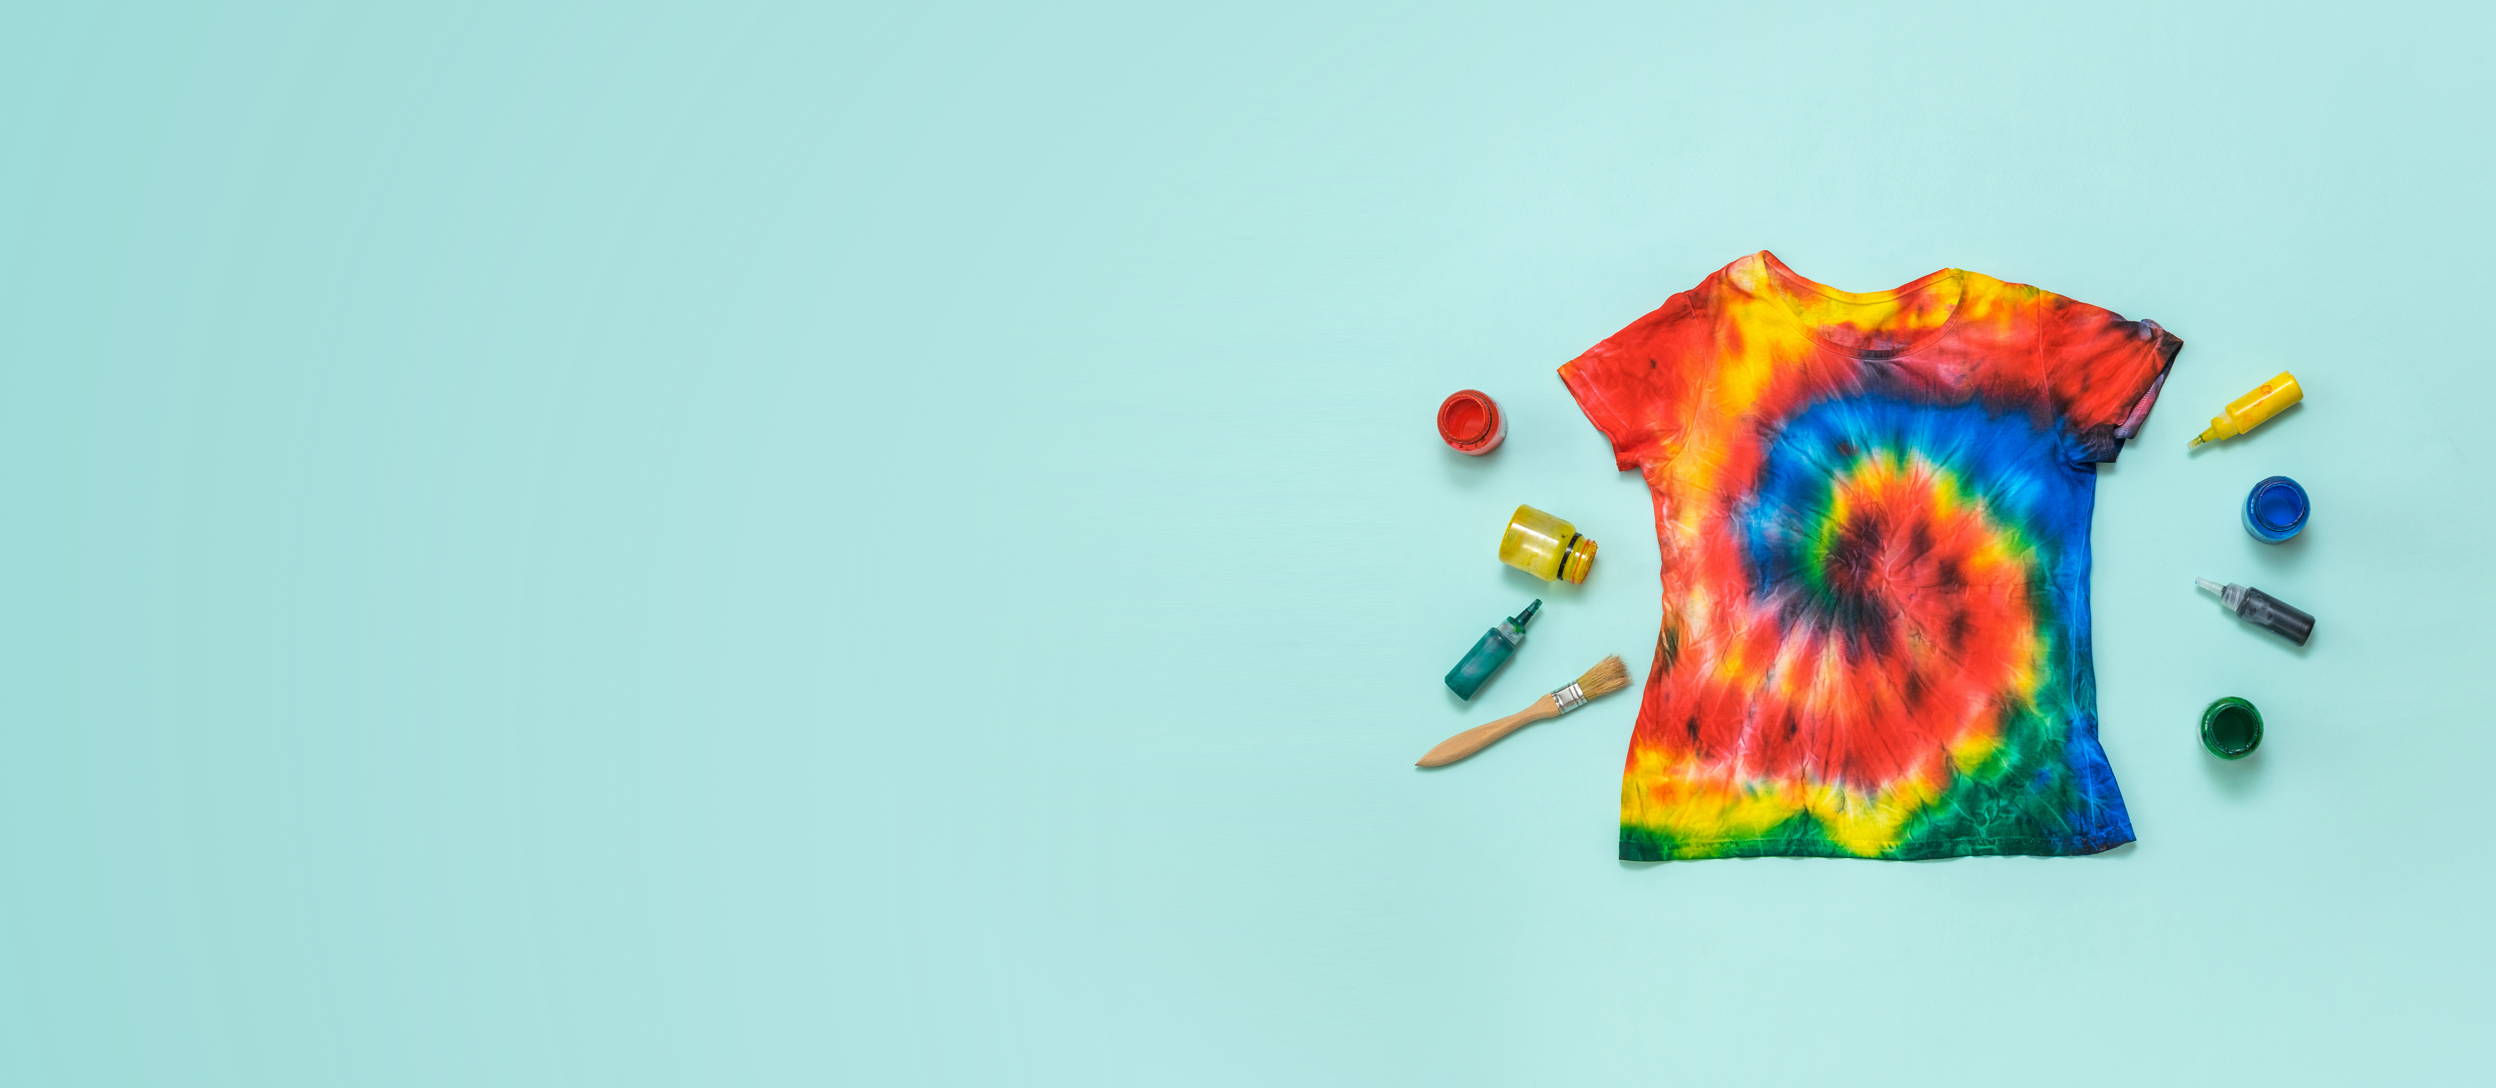 A tie dyed t-shirt surrounded by colorful ink dropper bottles and a paint brush for Confetti's Virtual Tie Dye Class